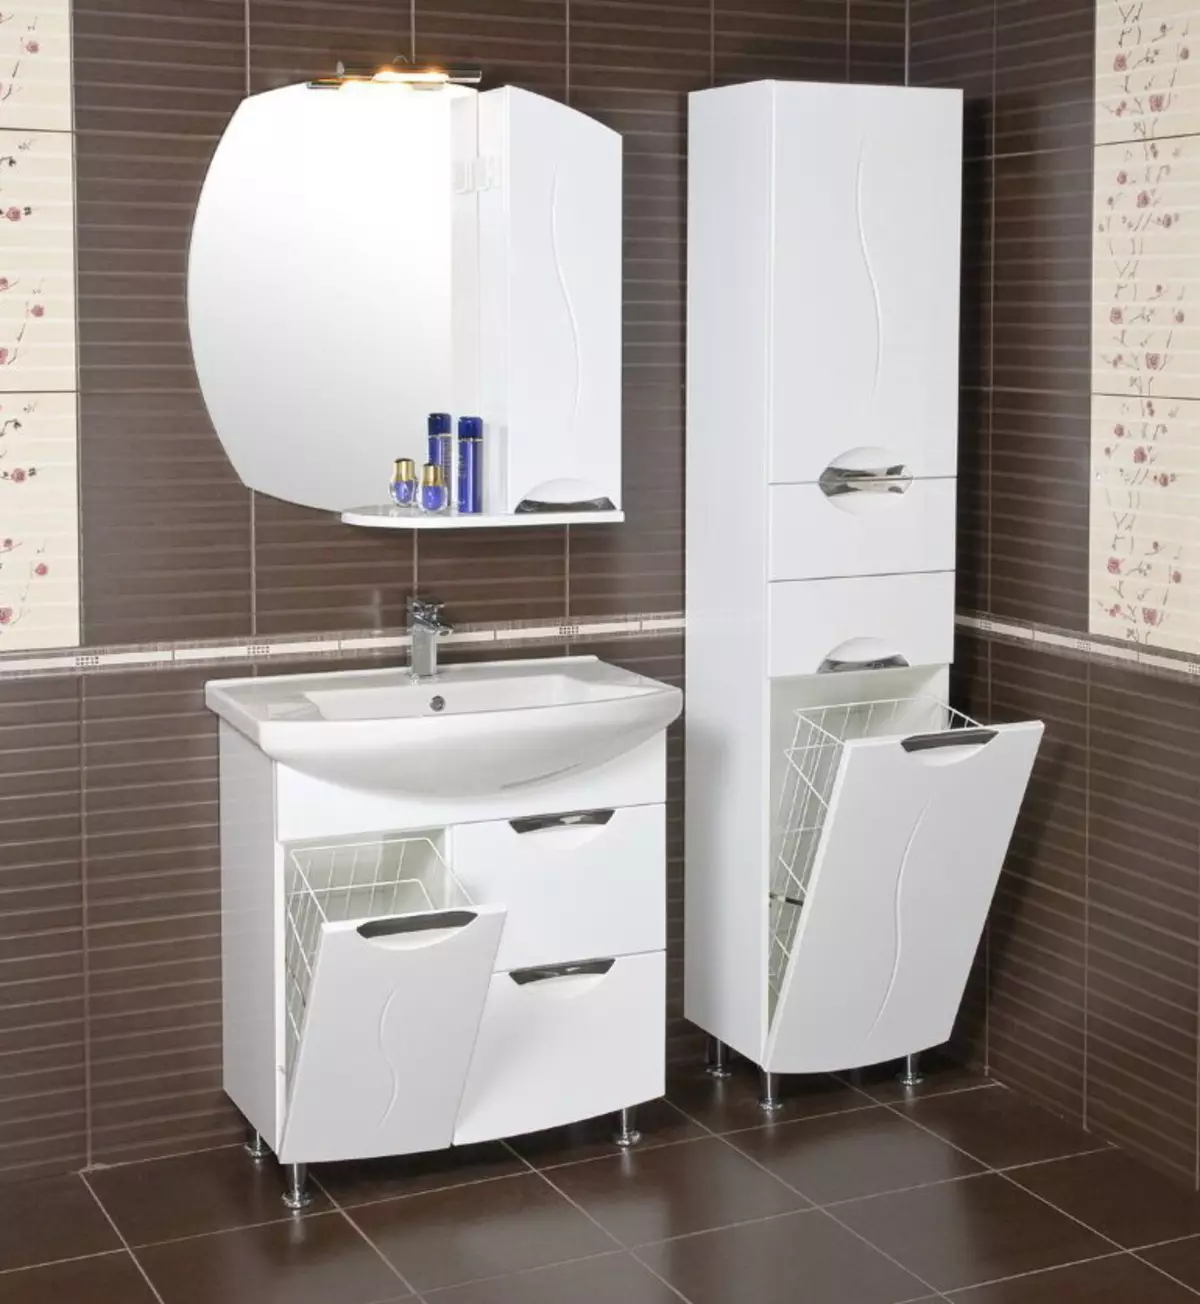 Bathroom Pencil: Overview of cabinets 25 cm wide and a depth of 20 cm, narrow models and with dimensions of 30 cm and 50 cm, 60 cm and 35 cm, outdoor, red and white 10387_44